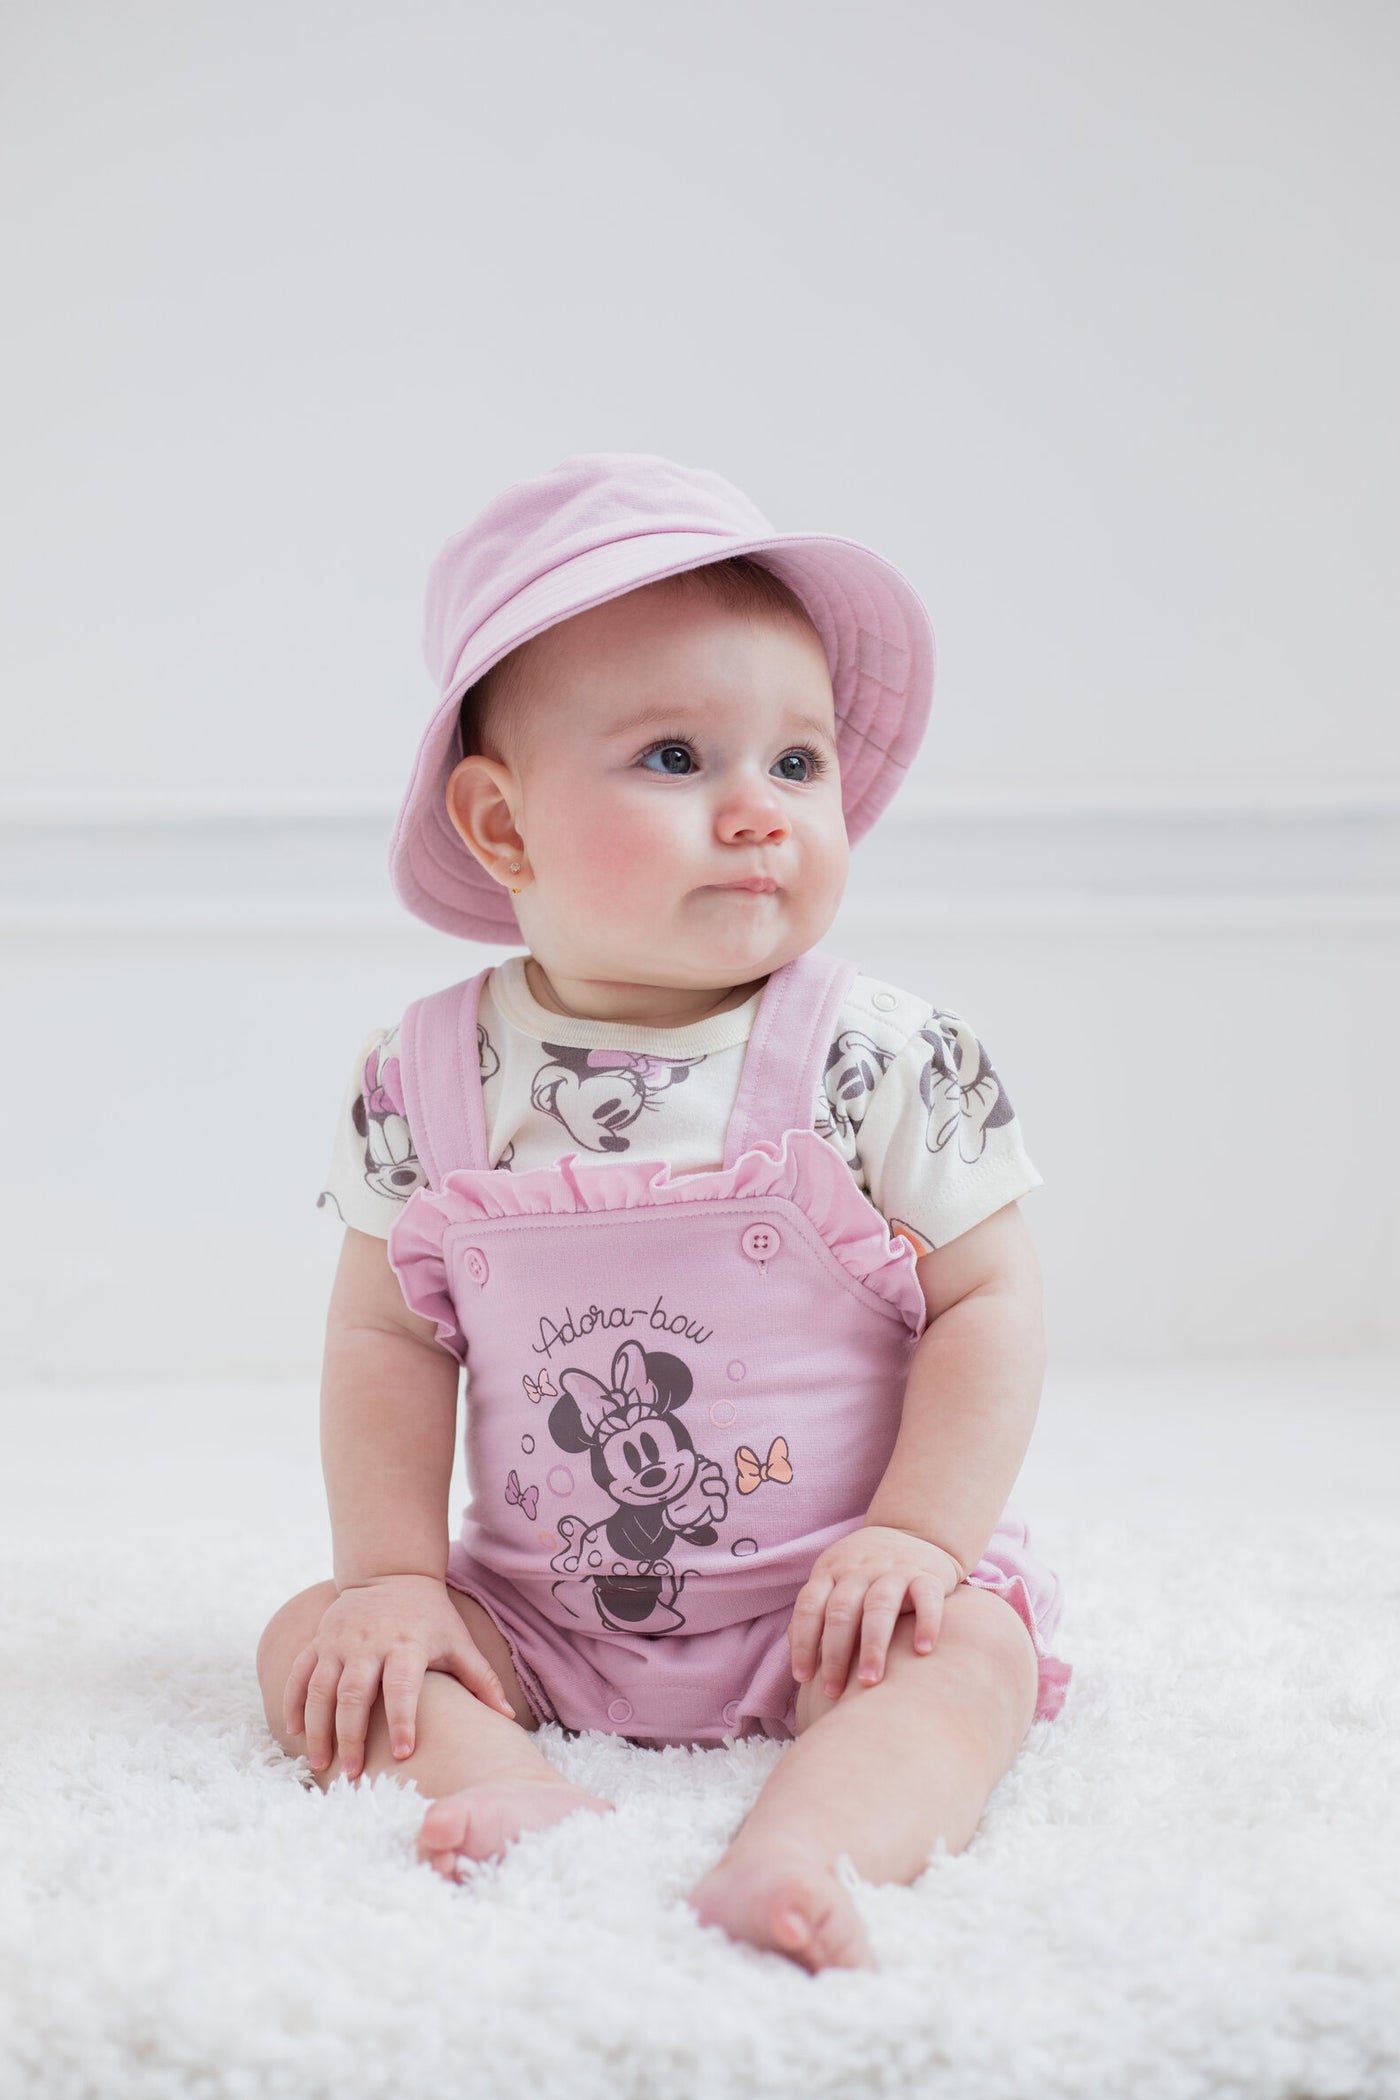 Minnie Mouse French Terry Short Overalls T-Shirt and Hat 3 Piece Outfit Set